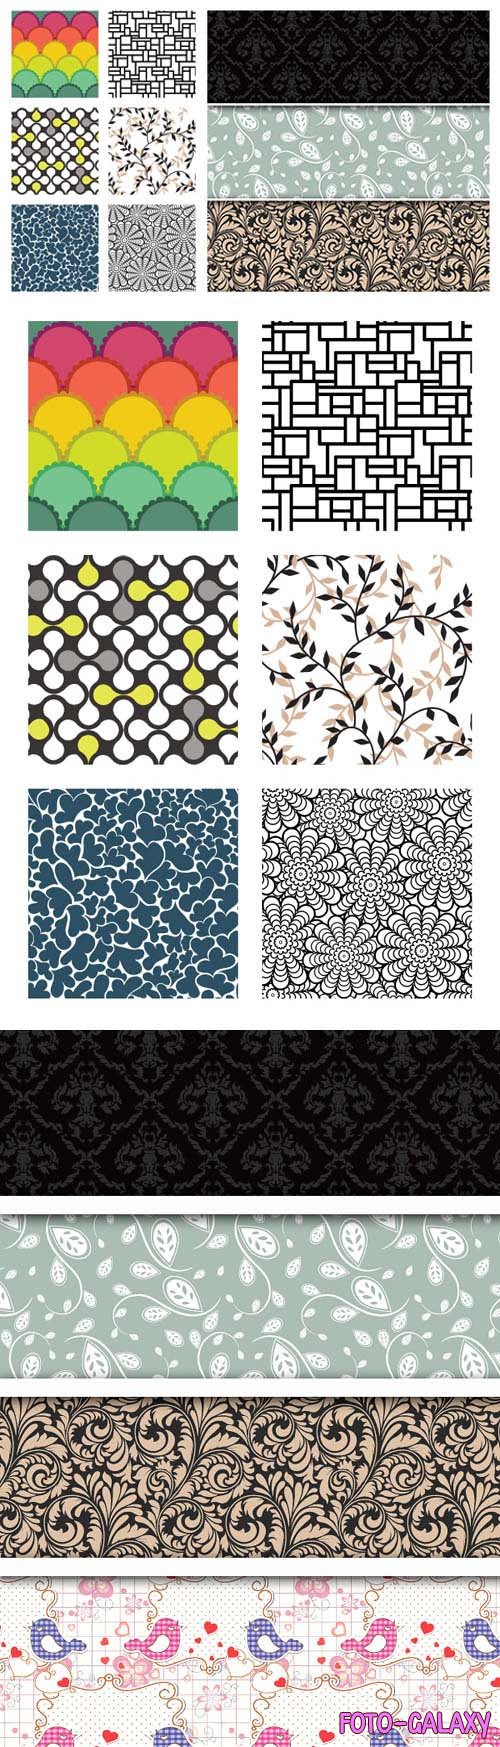 Geometric Patterns Vector Templates Collection